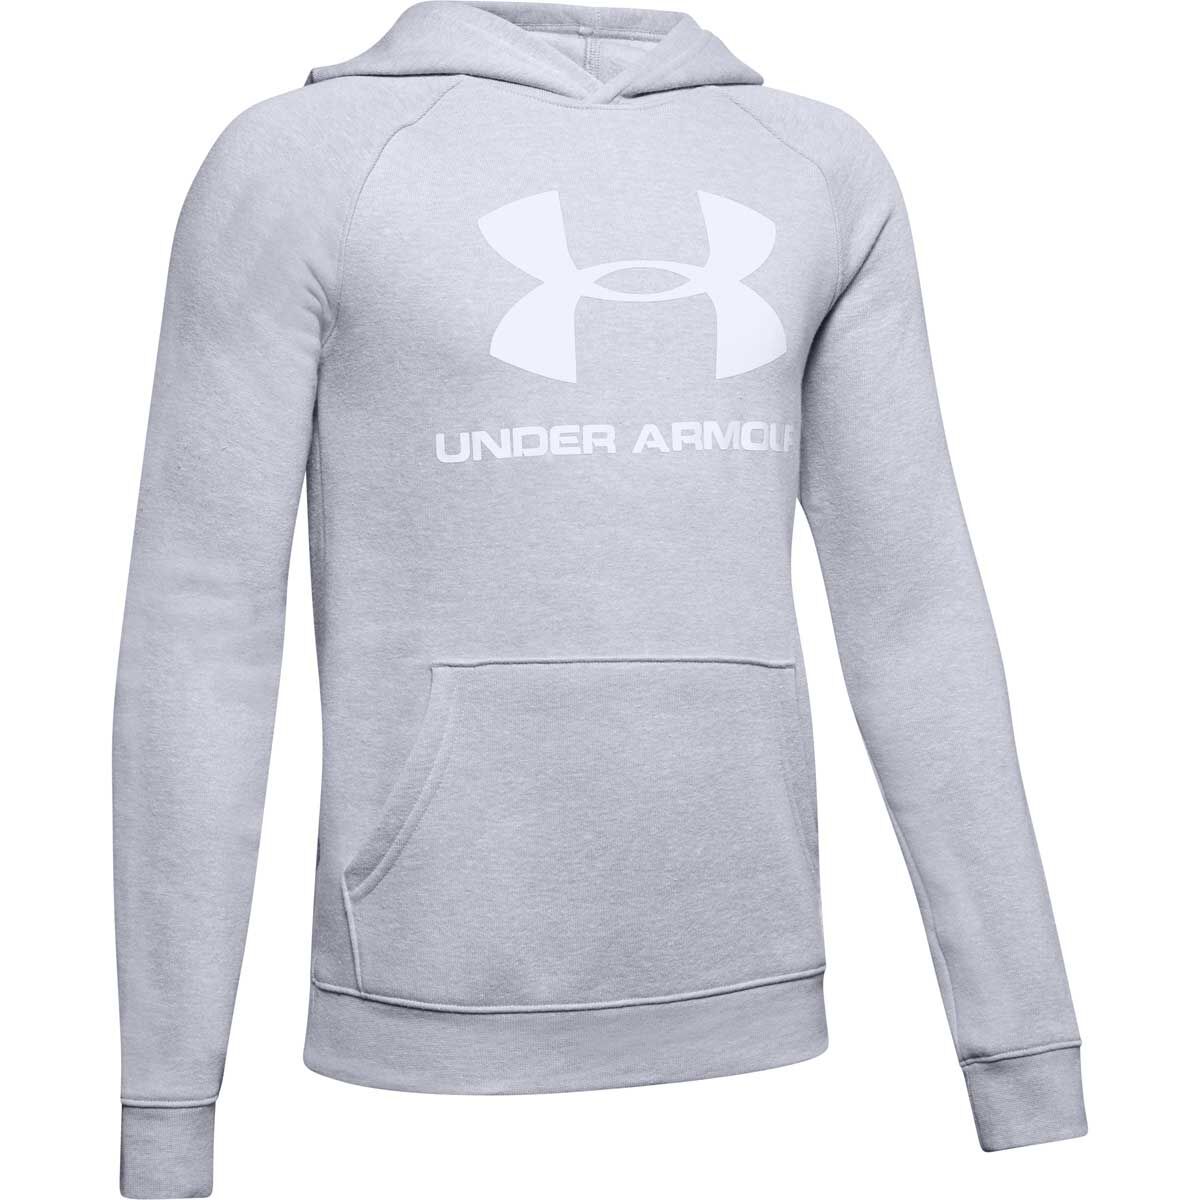 white under armour sweater